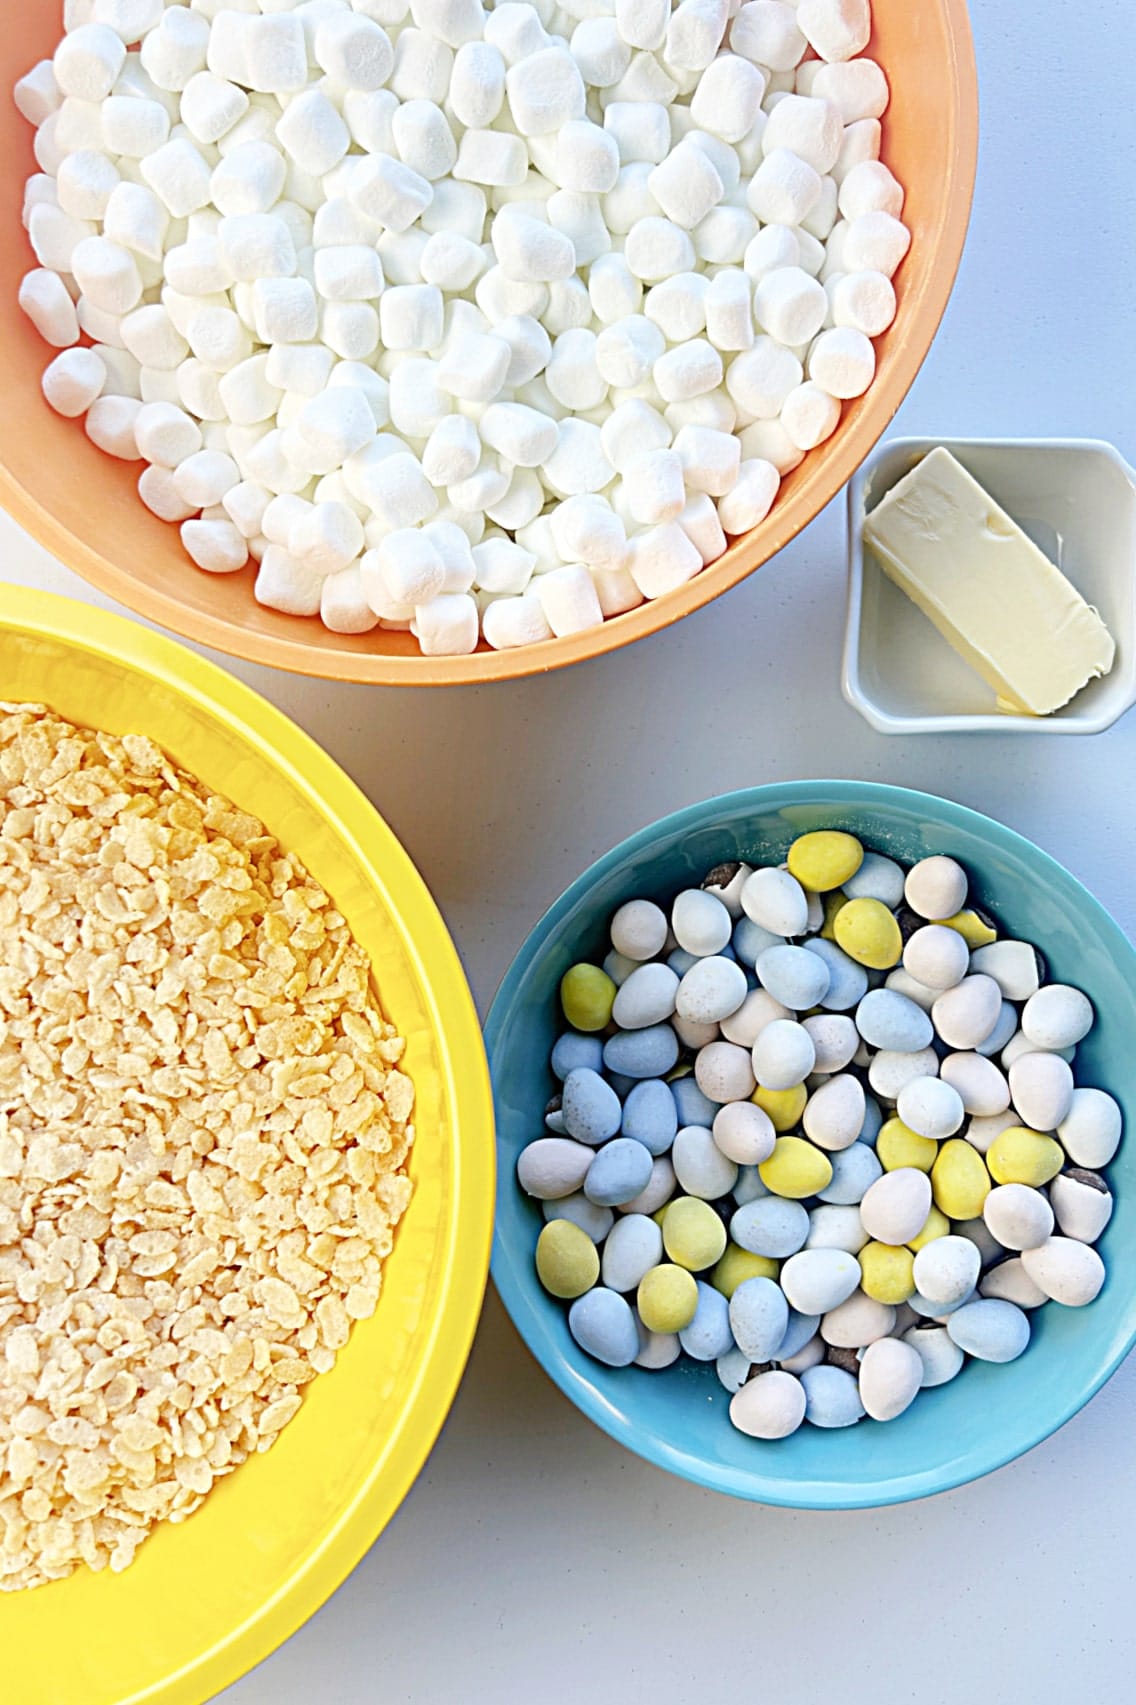 Assorted ingredients for Rice Krispie Treats including marshmallows, chocolate candies, crisped rice cereal, and butter displayed in separate colorful bowls.